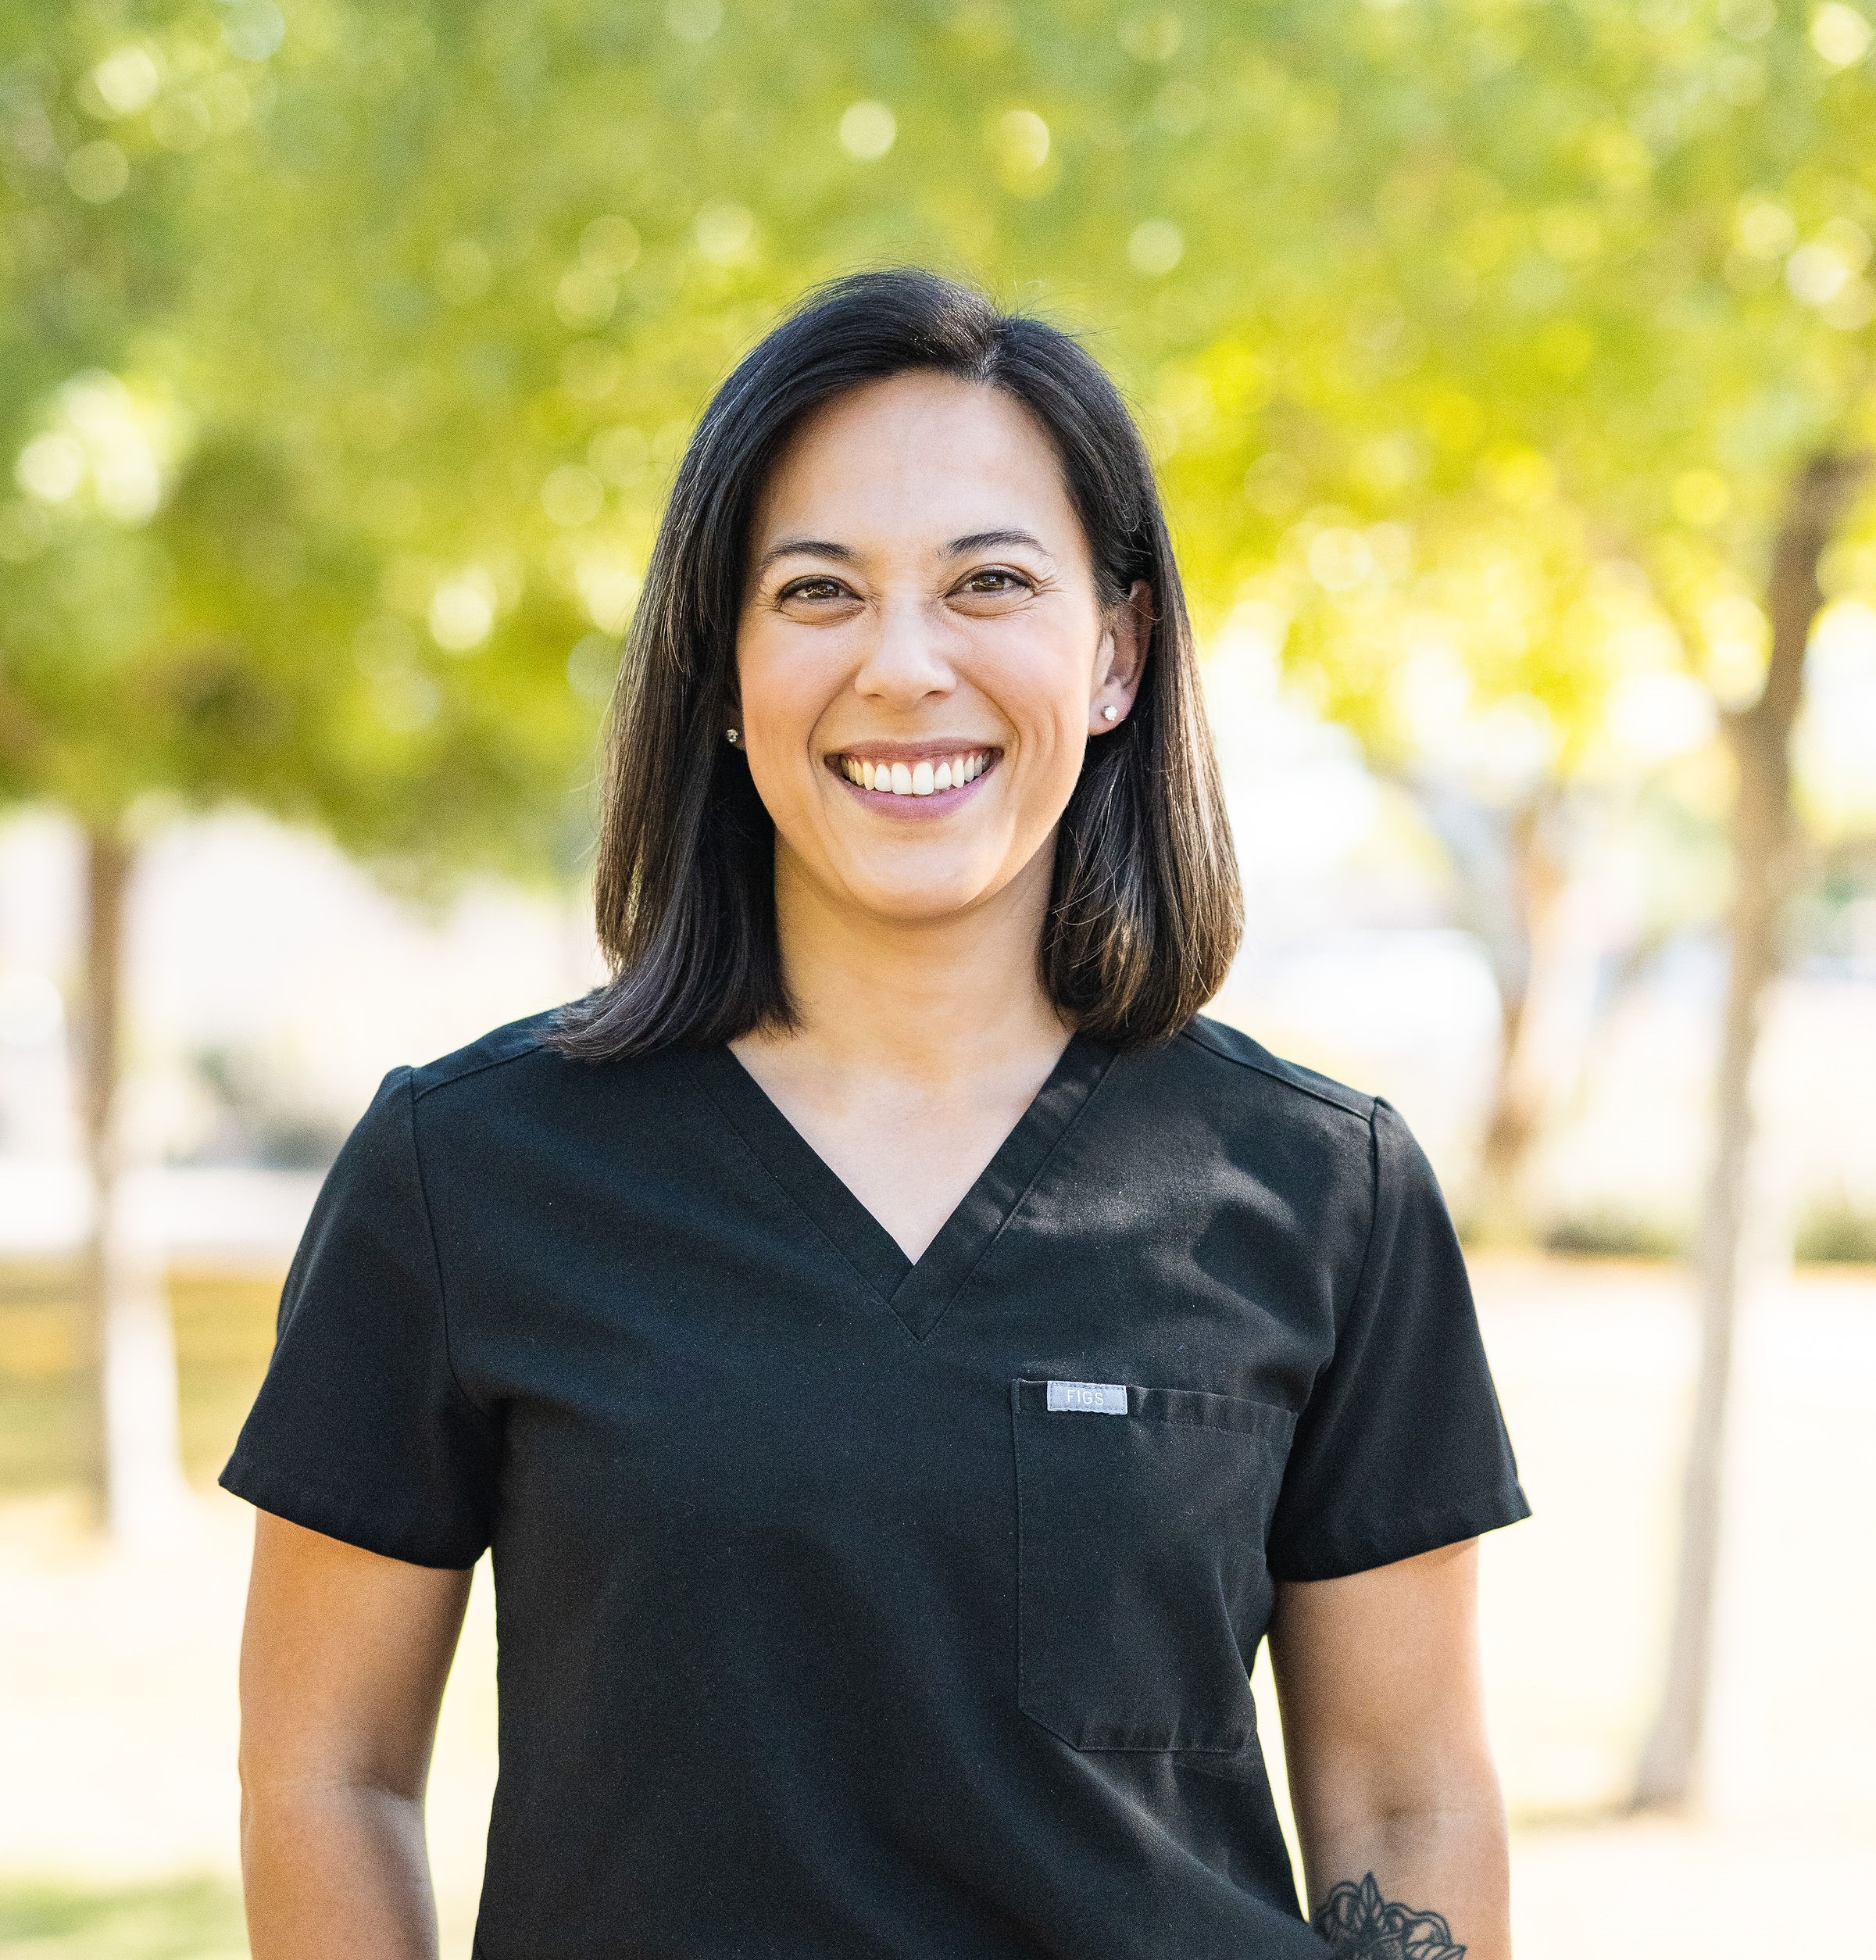 Dr. Ashley Froese, Prime Direct Health, Gilbert, AZ